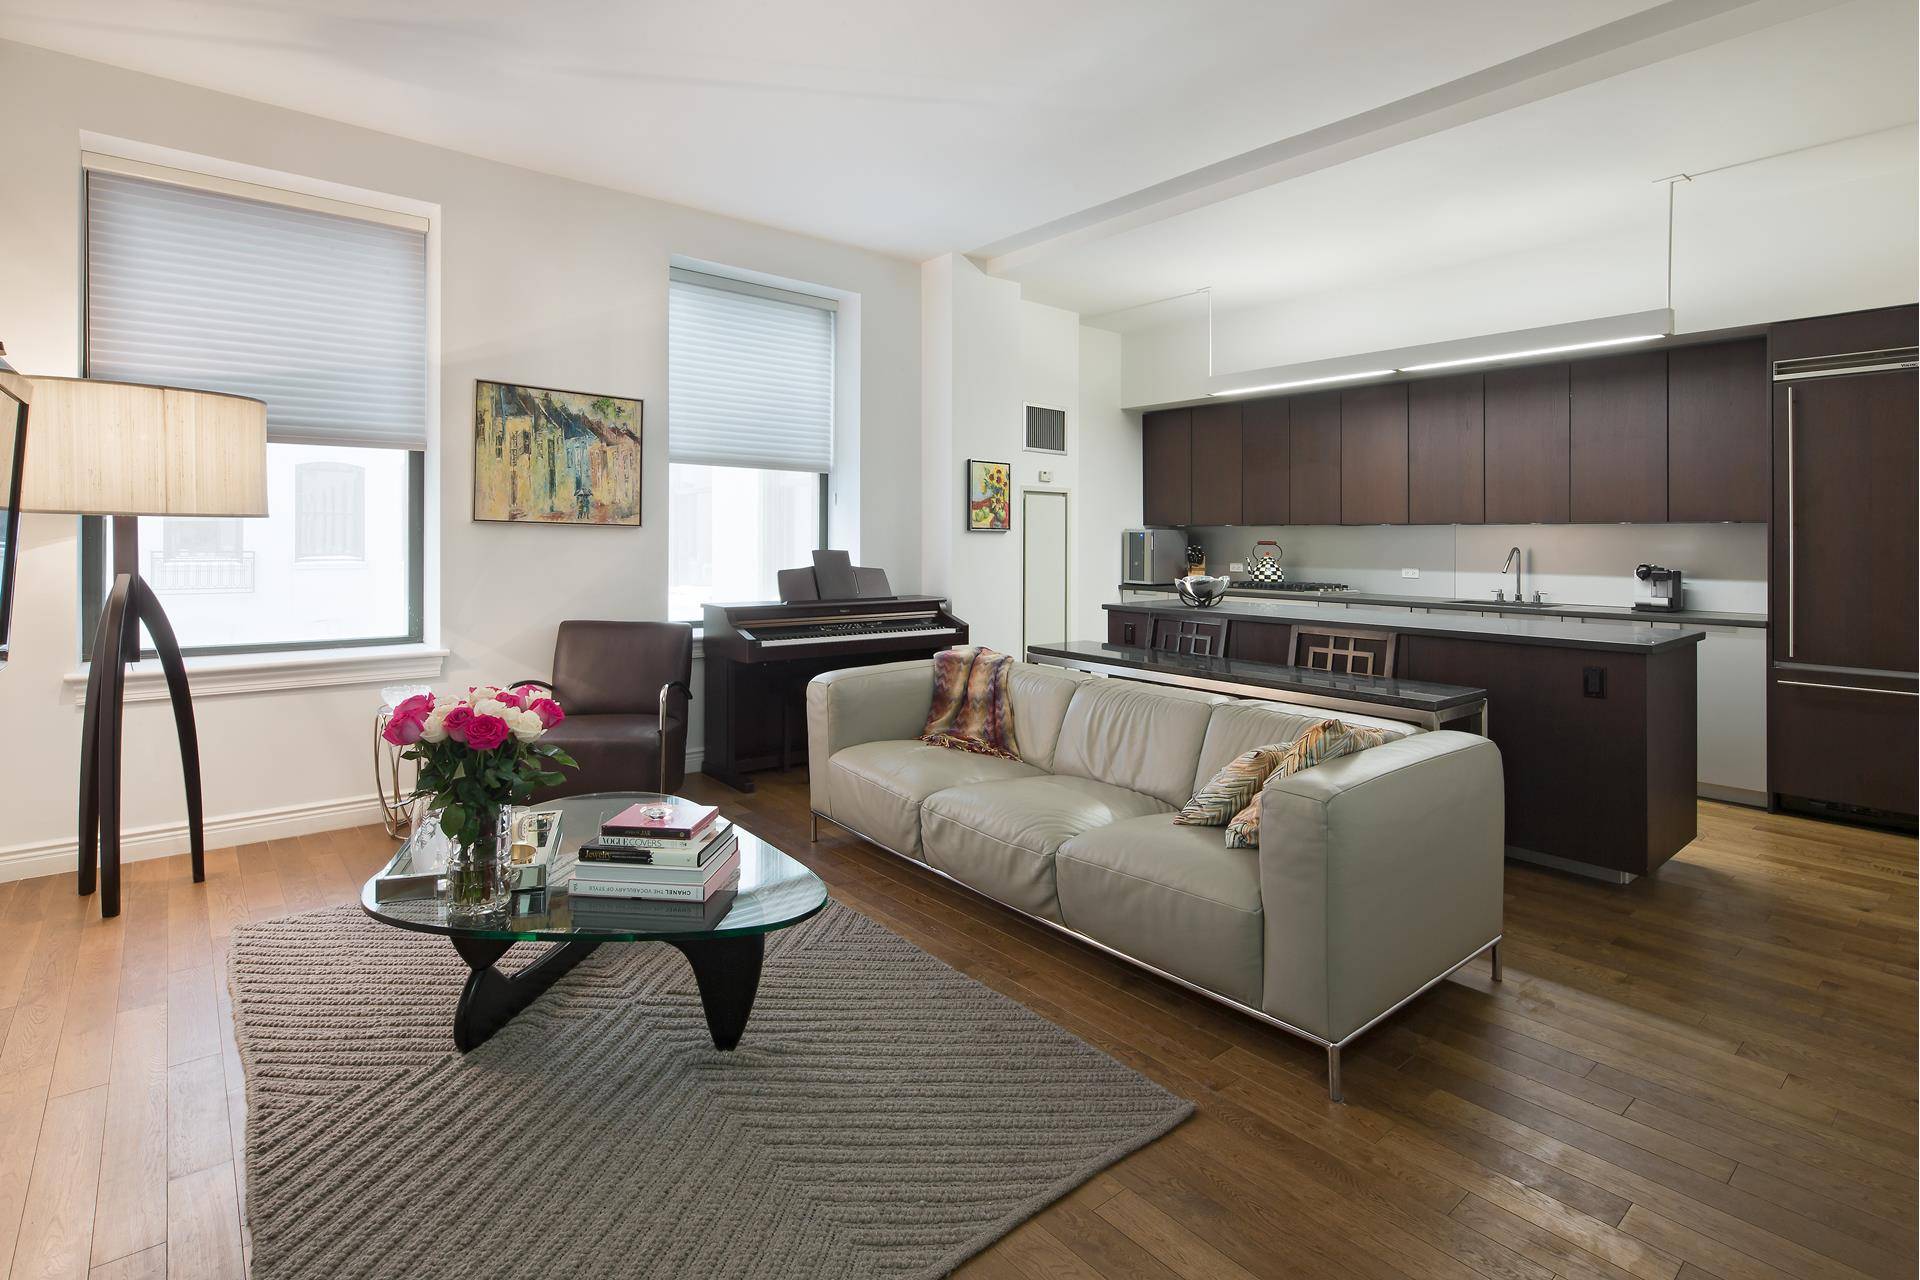 Apartment 7T's lofty open living space is as impressive as its location.